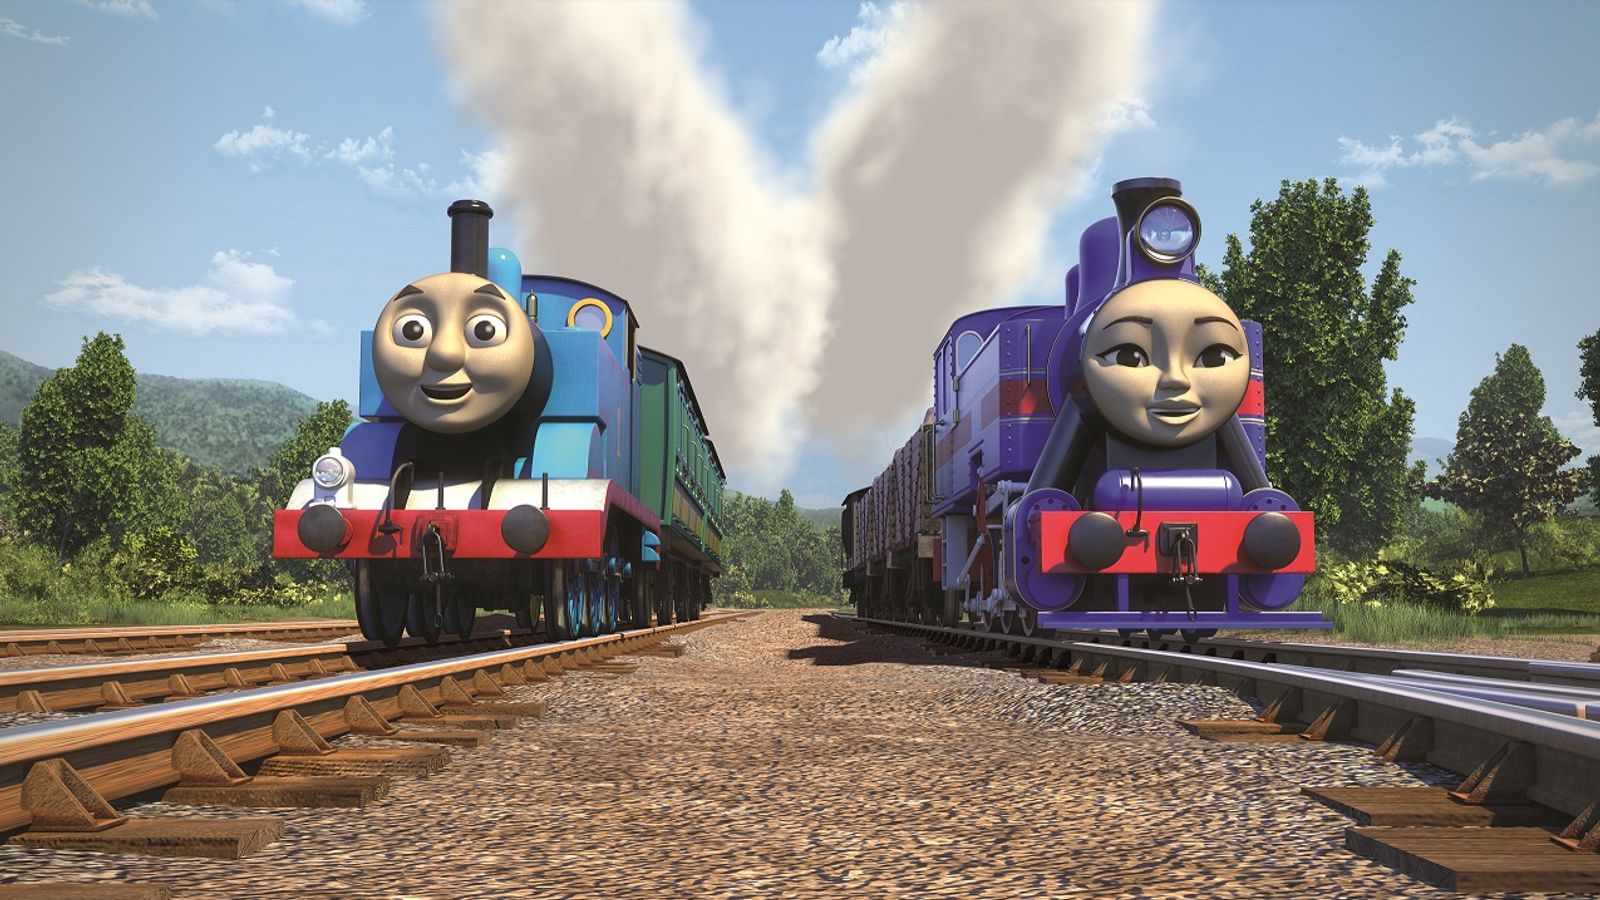 Thomas the Tank Engine's global friends.